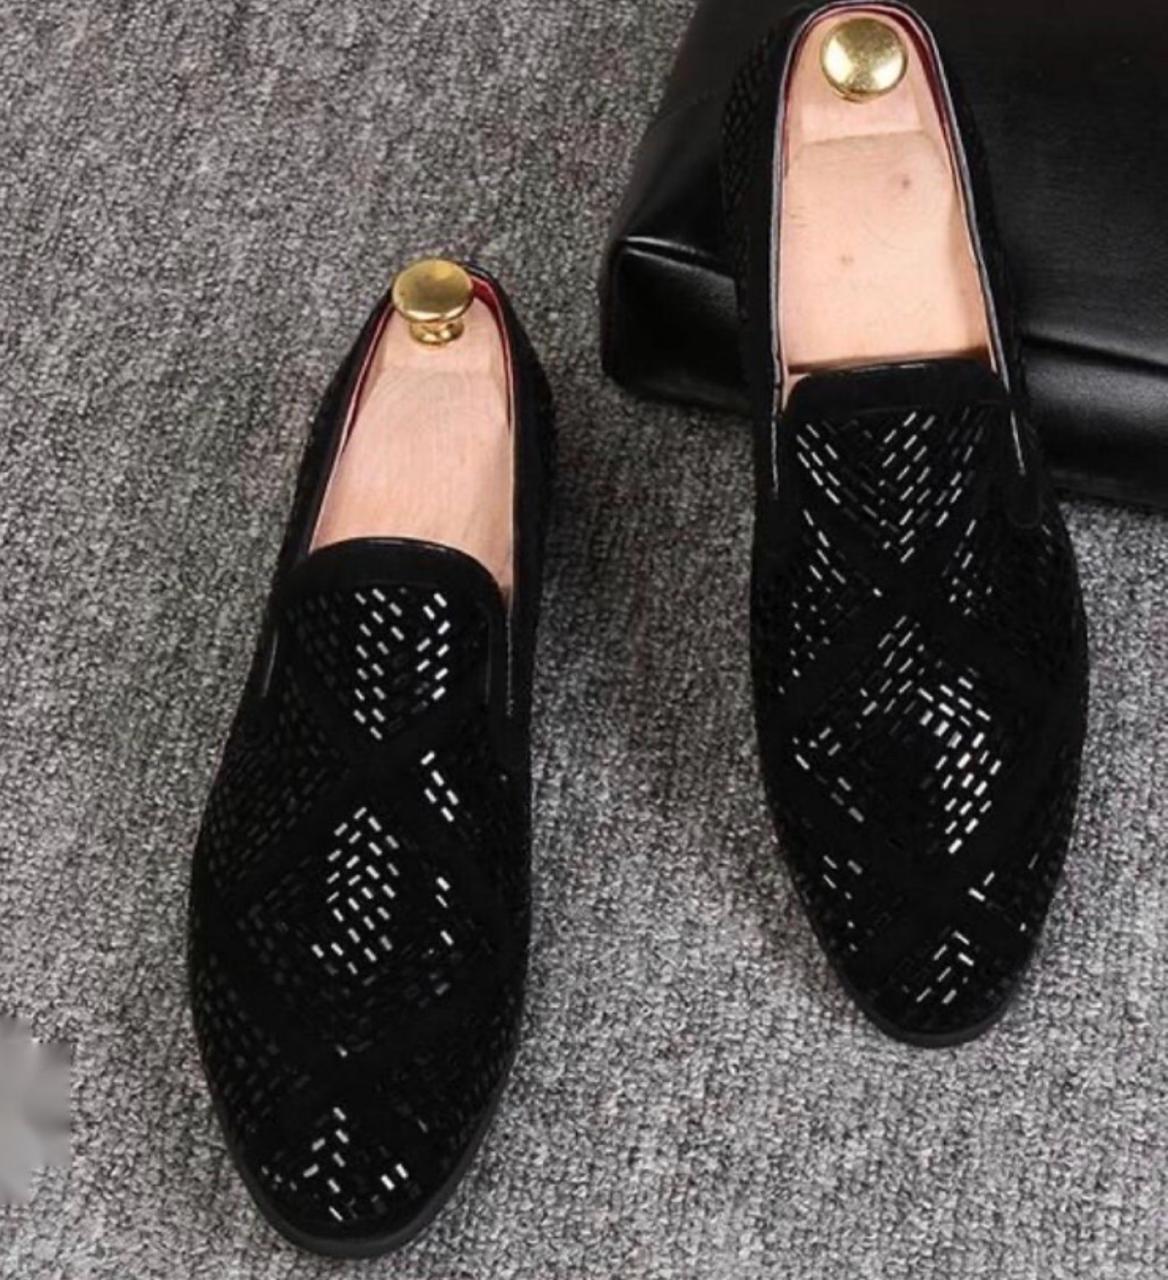 Stylish Studded Moccasins Men's Fashion Wedding Revert High Quality Slip On Flat Loafer-Unique and Classy  -Unique and Classy